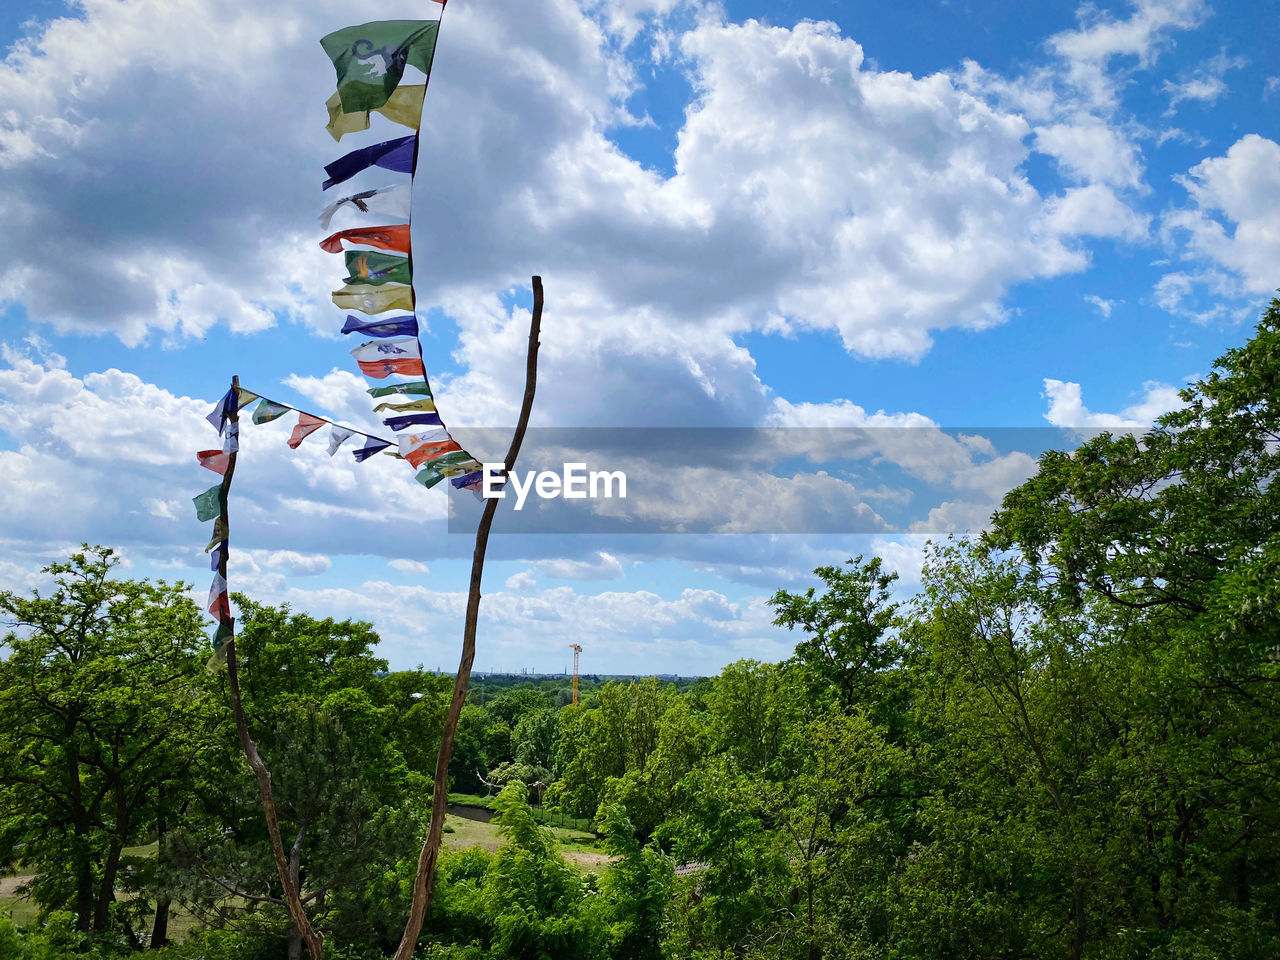 sky, cloud, nature, tree, plant, flag, environment, day, windsports, wind, low angle view, no people, outdoors, green, pole, blue, kite sports, beauty in nature, land